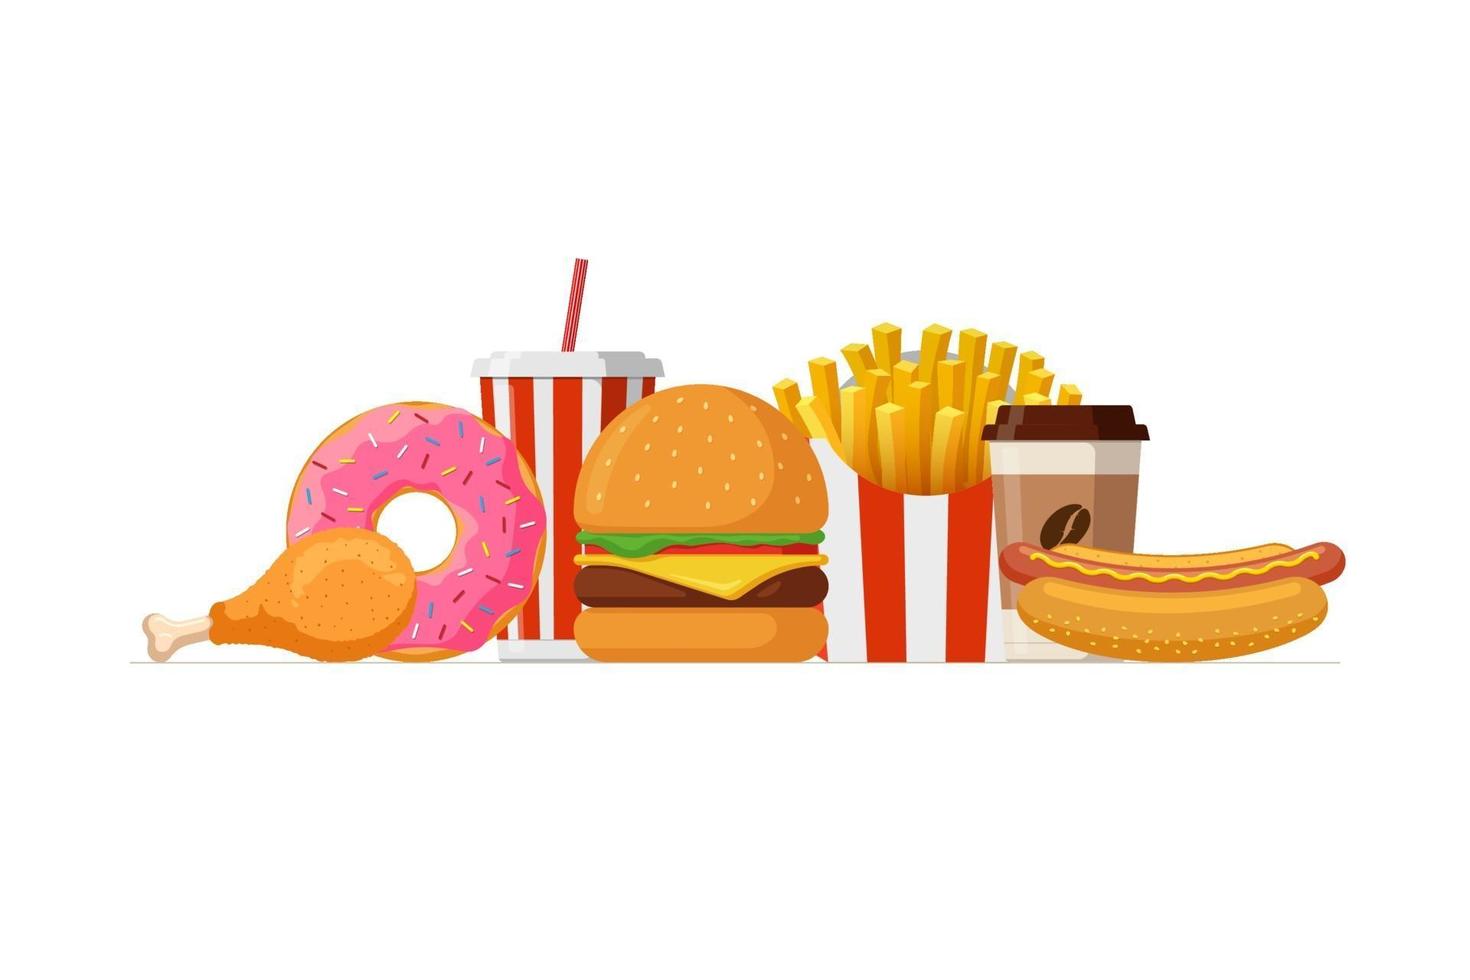 Fast food lunch meal set. Classic cheese burger, french fries pack, fried crispy chicken leg, glazed donut, soft drink, coffee cup and hot dog. Flat eps vector illustration